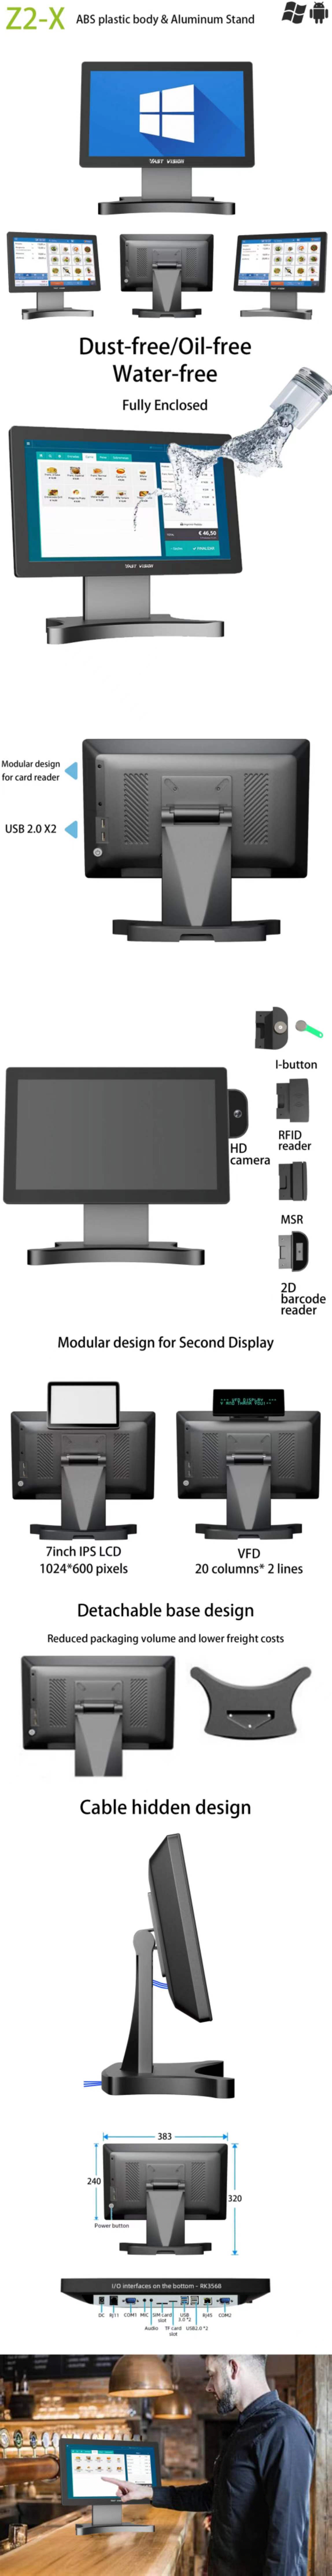 15 inch pos system POS system for Retail store.jpg